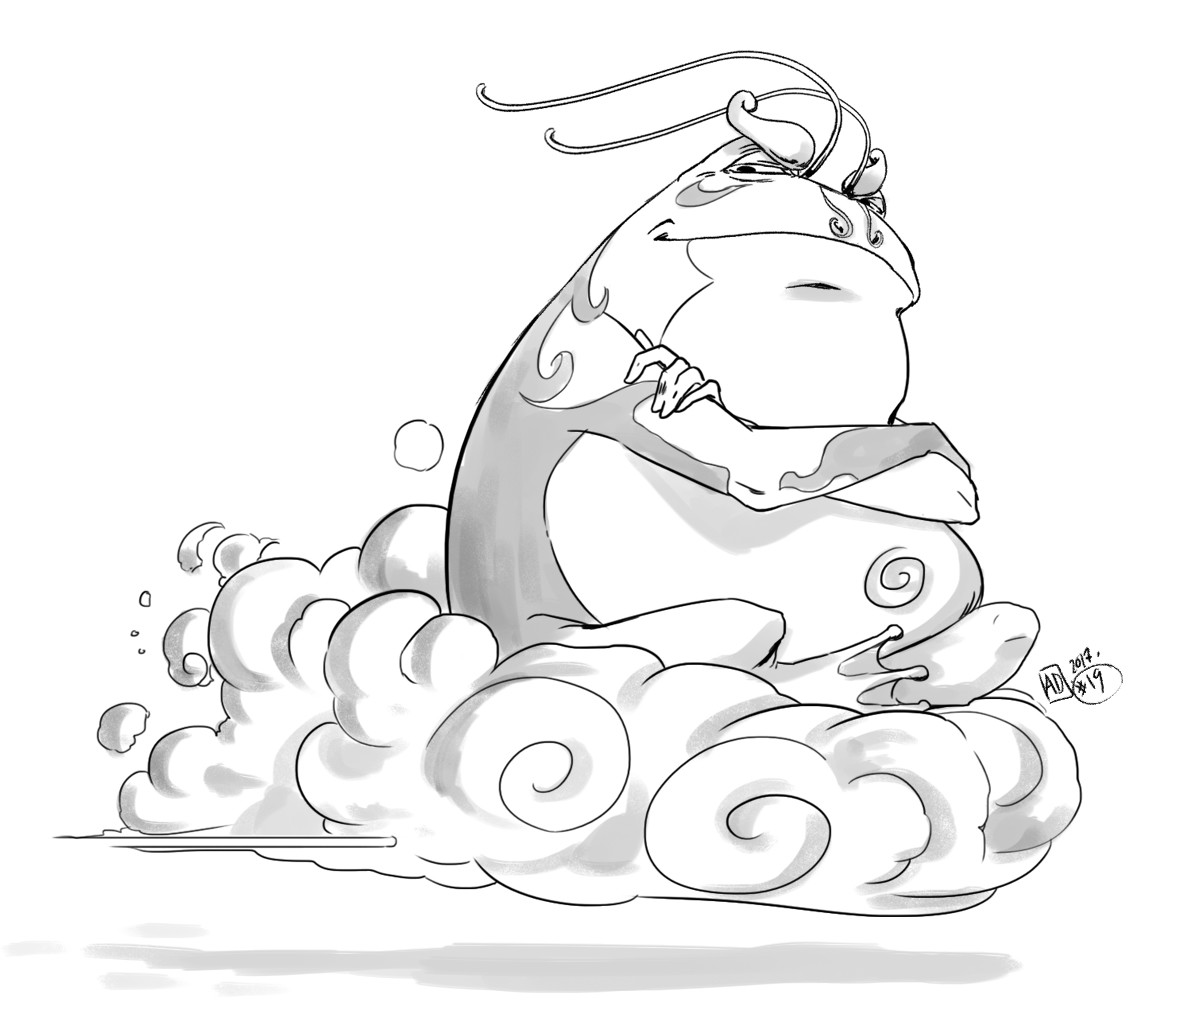 Day #19 - clouds

wind waker frog 